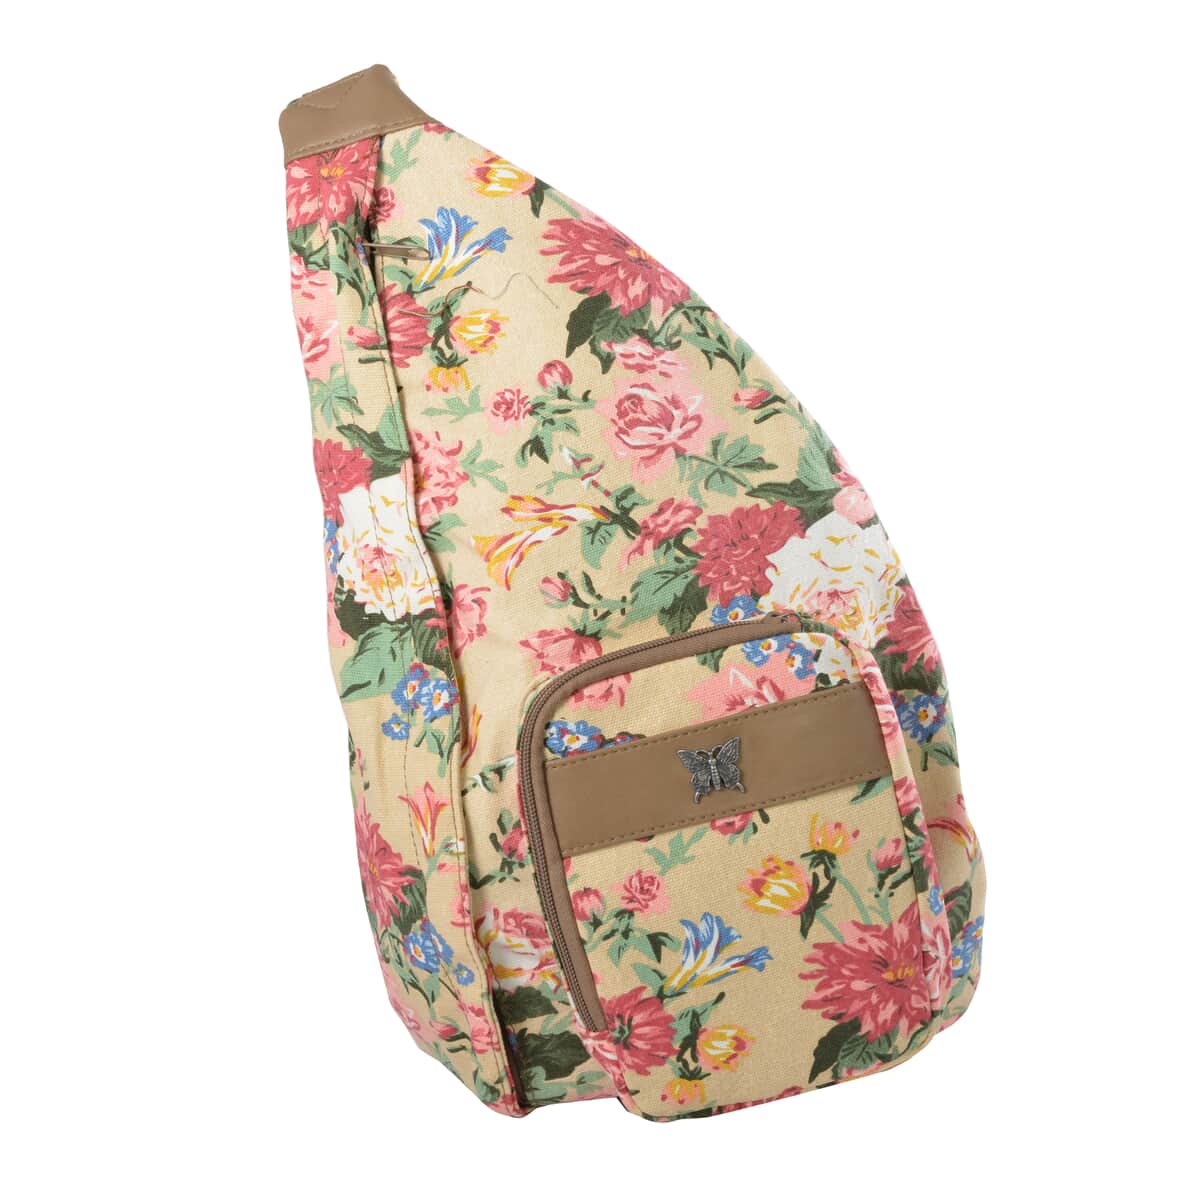 Le Chateau Floral Backpack (18x11x8 in) image number 0